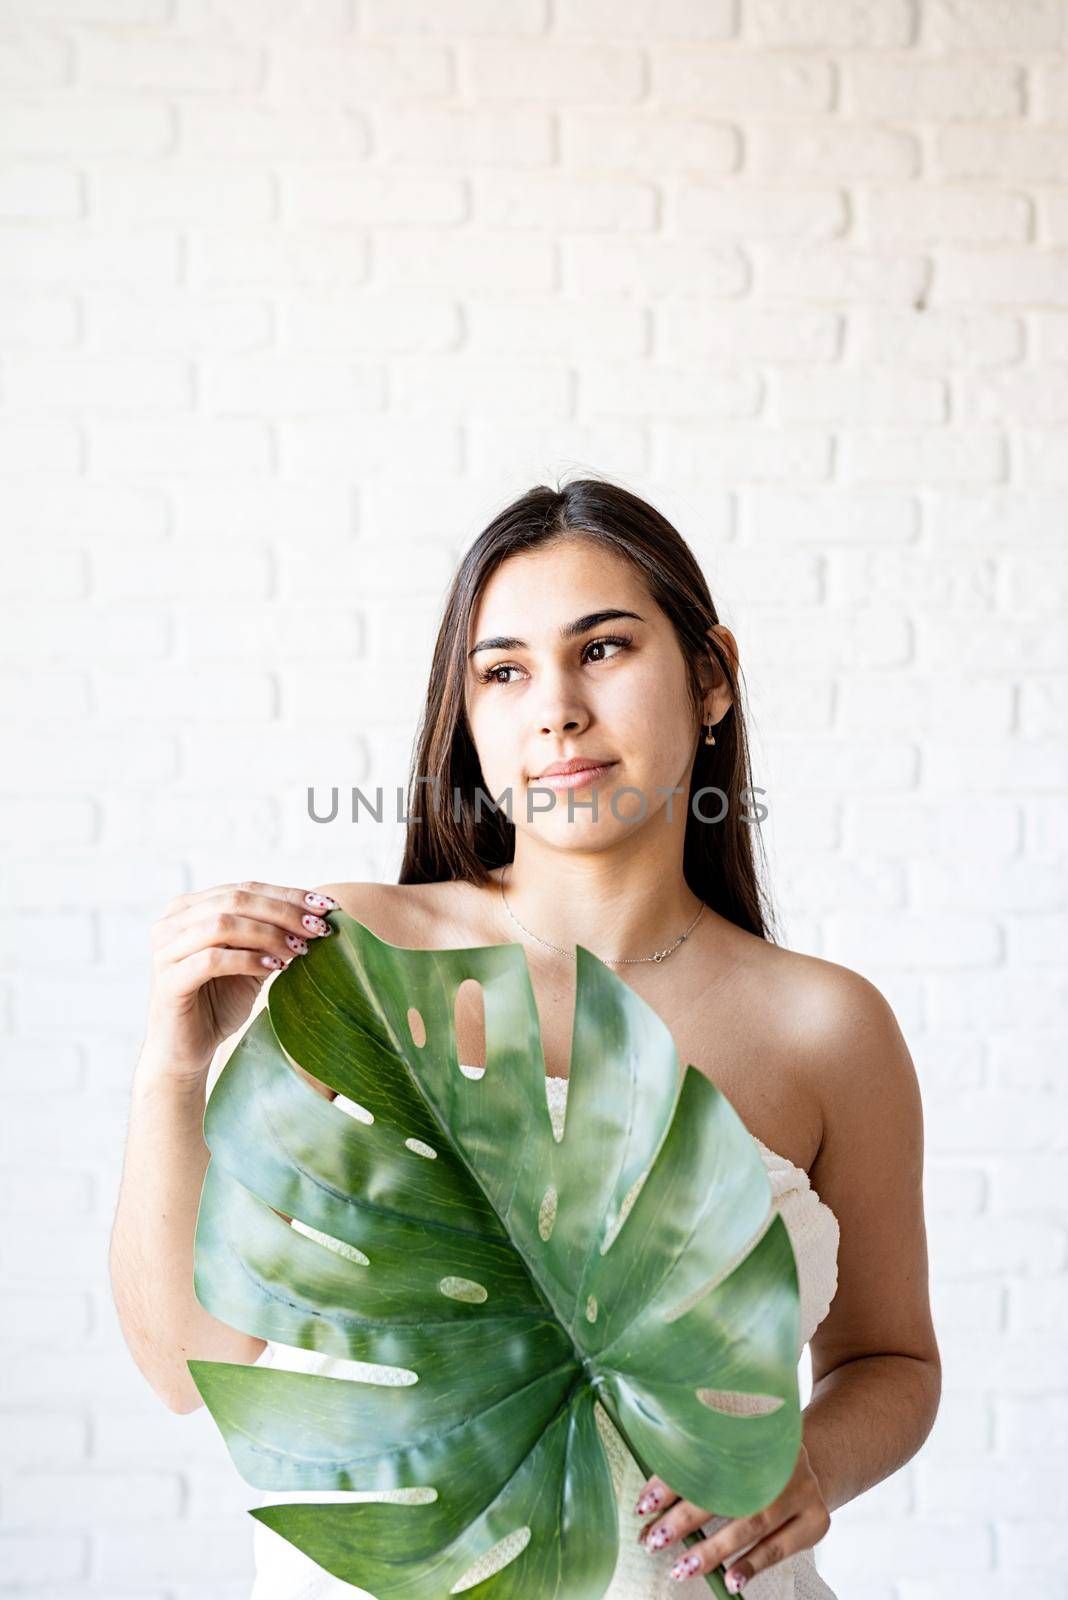 Happy beautiful woman wearing bath towels holding a green monstera leaf in front of her face by Desperada